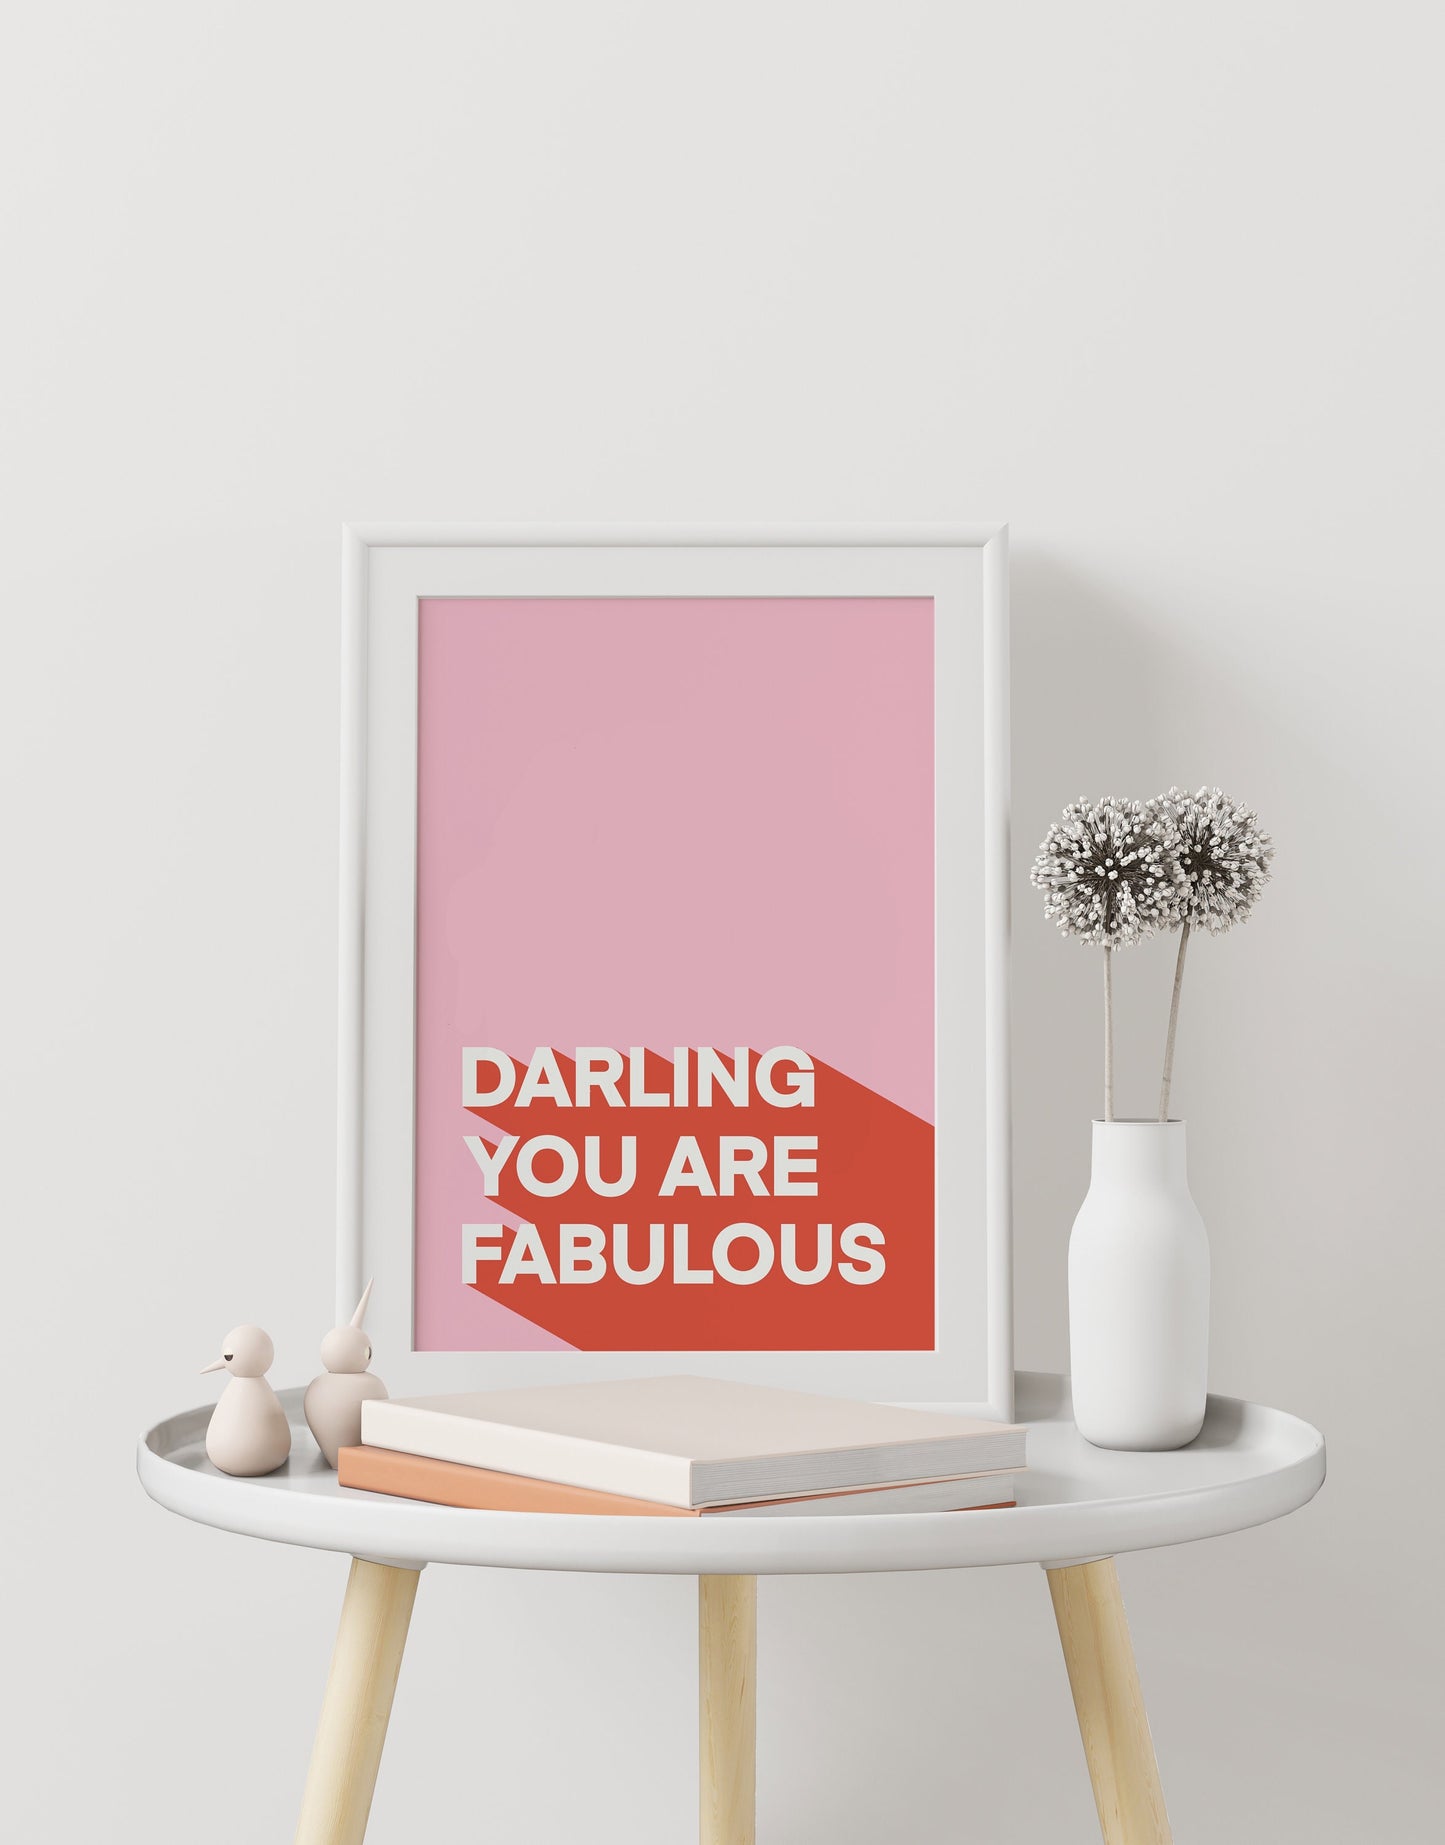 Darling, You Are Fabulous Print in Pink